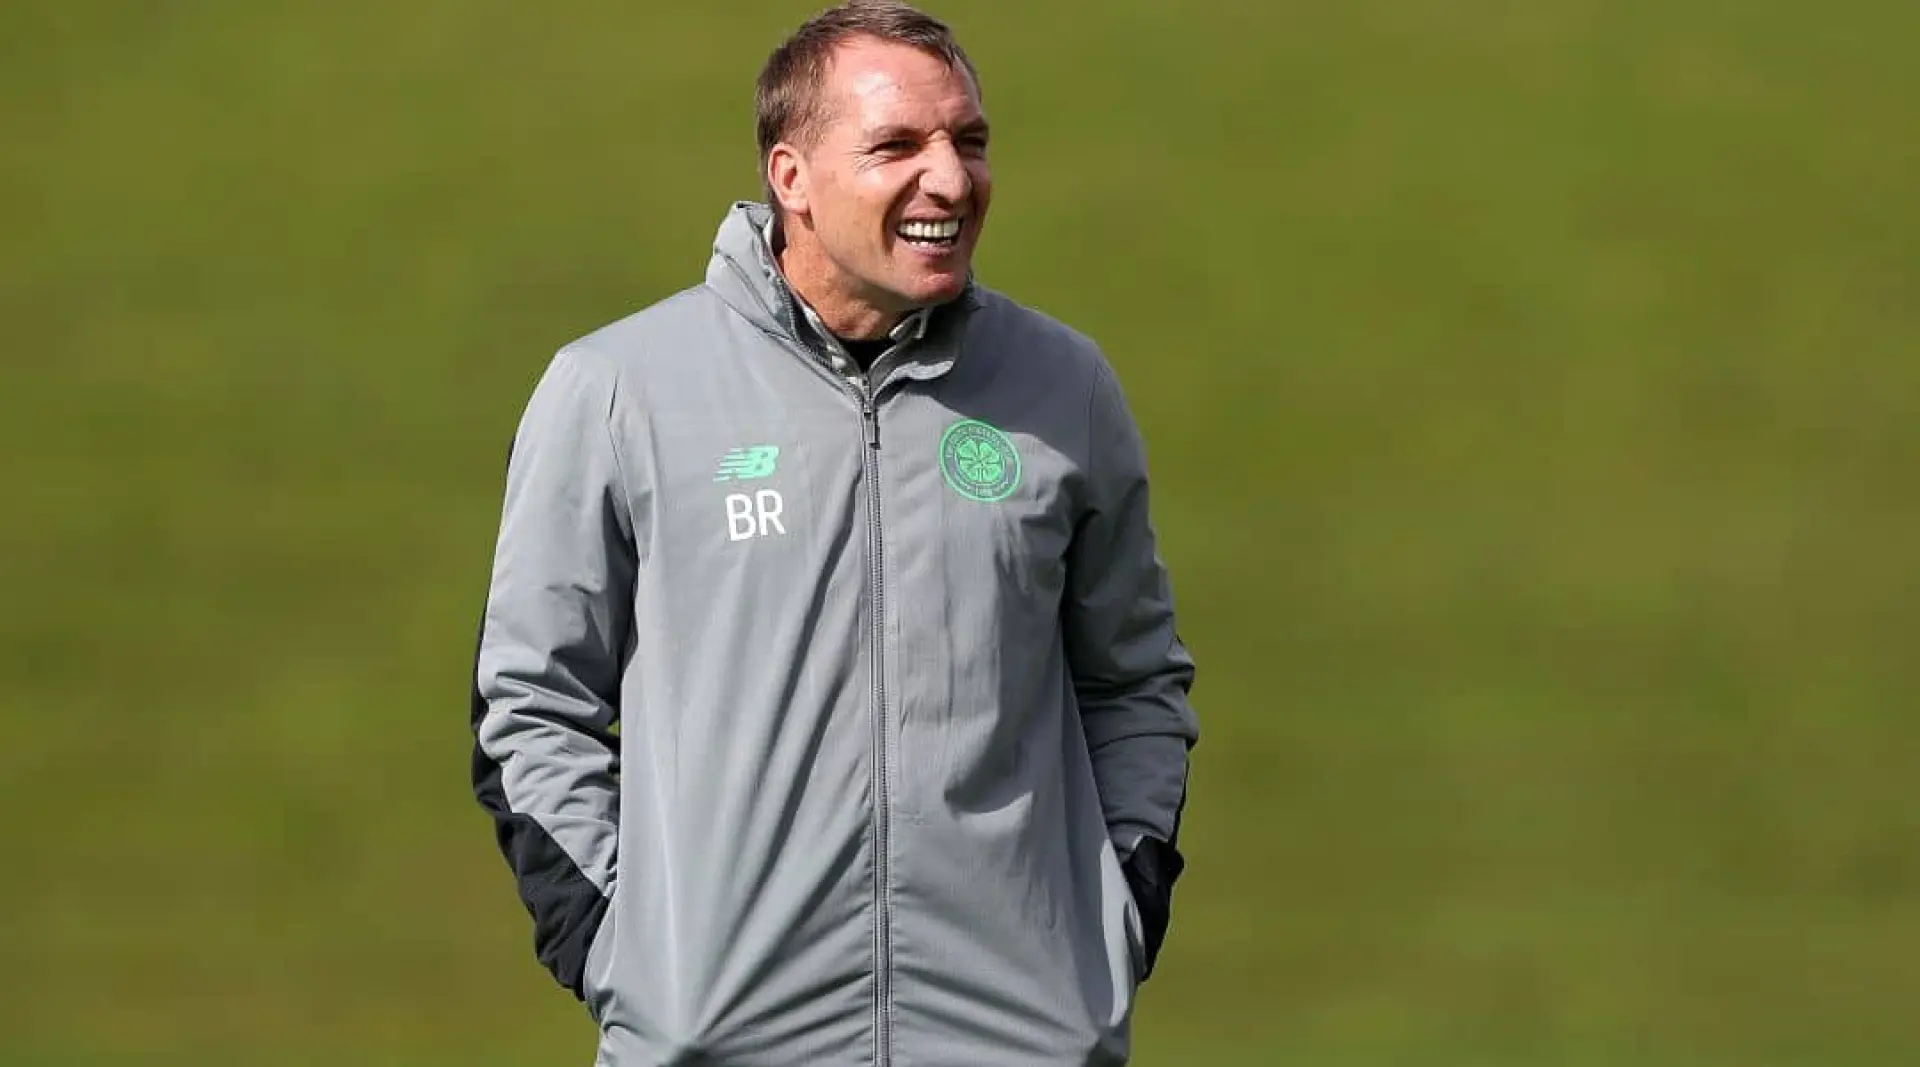 Champions league odds, Celtic odds, Tottenham odds, Liverpool odds, Champions League matchday three odds